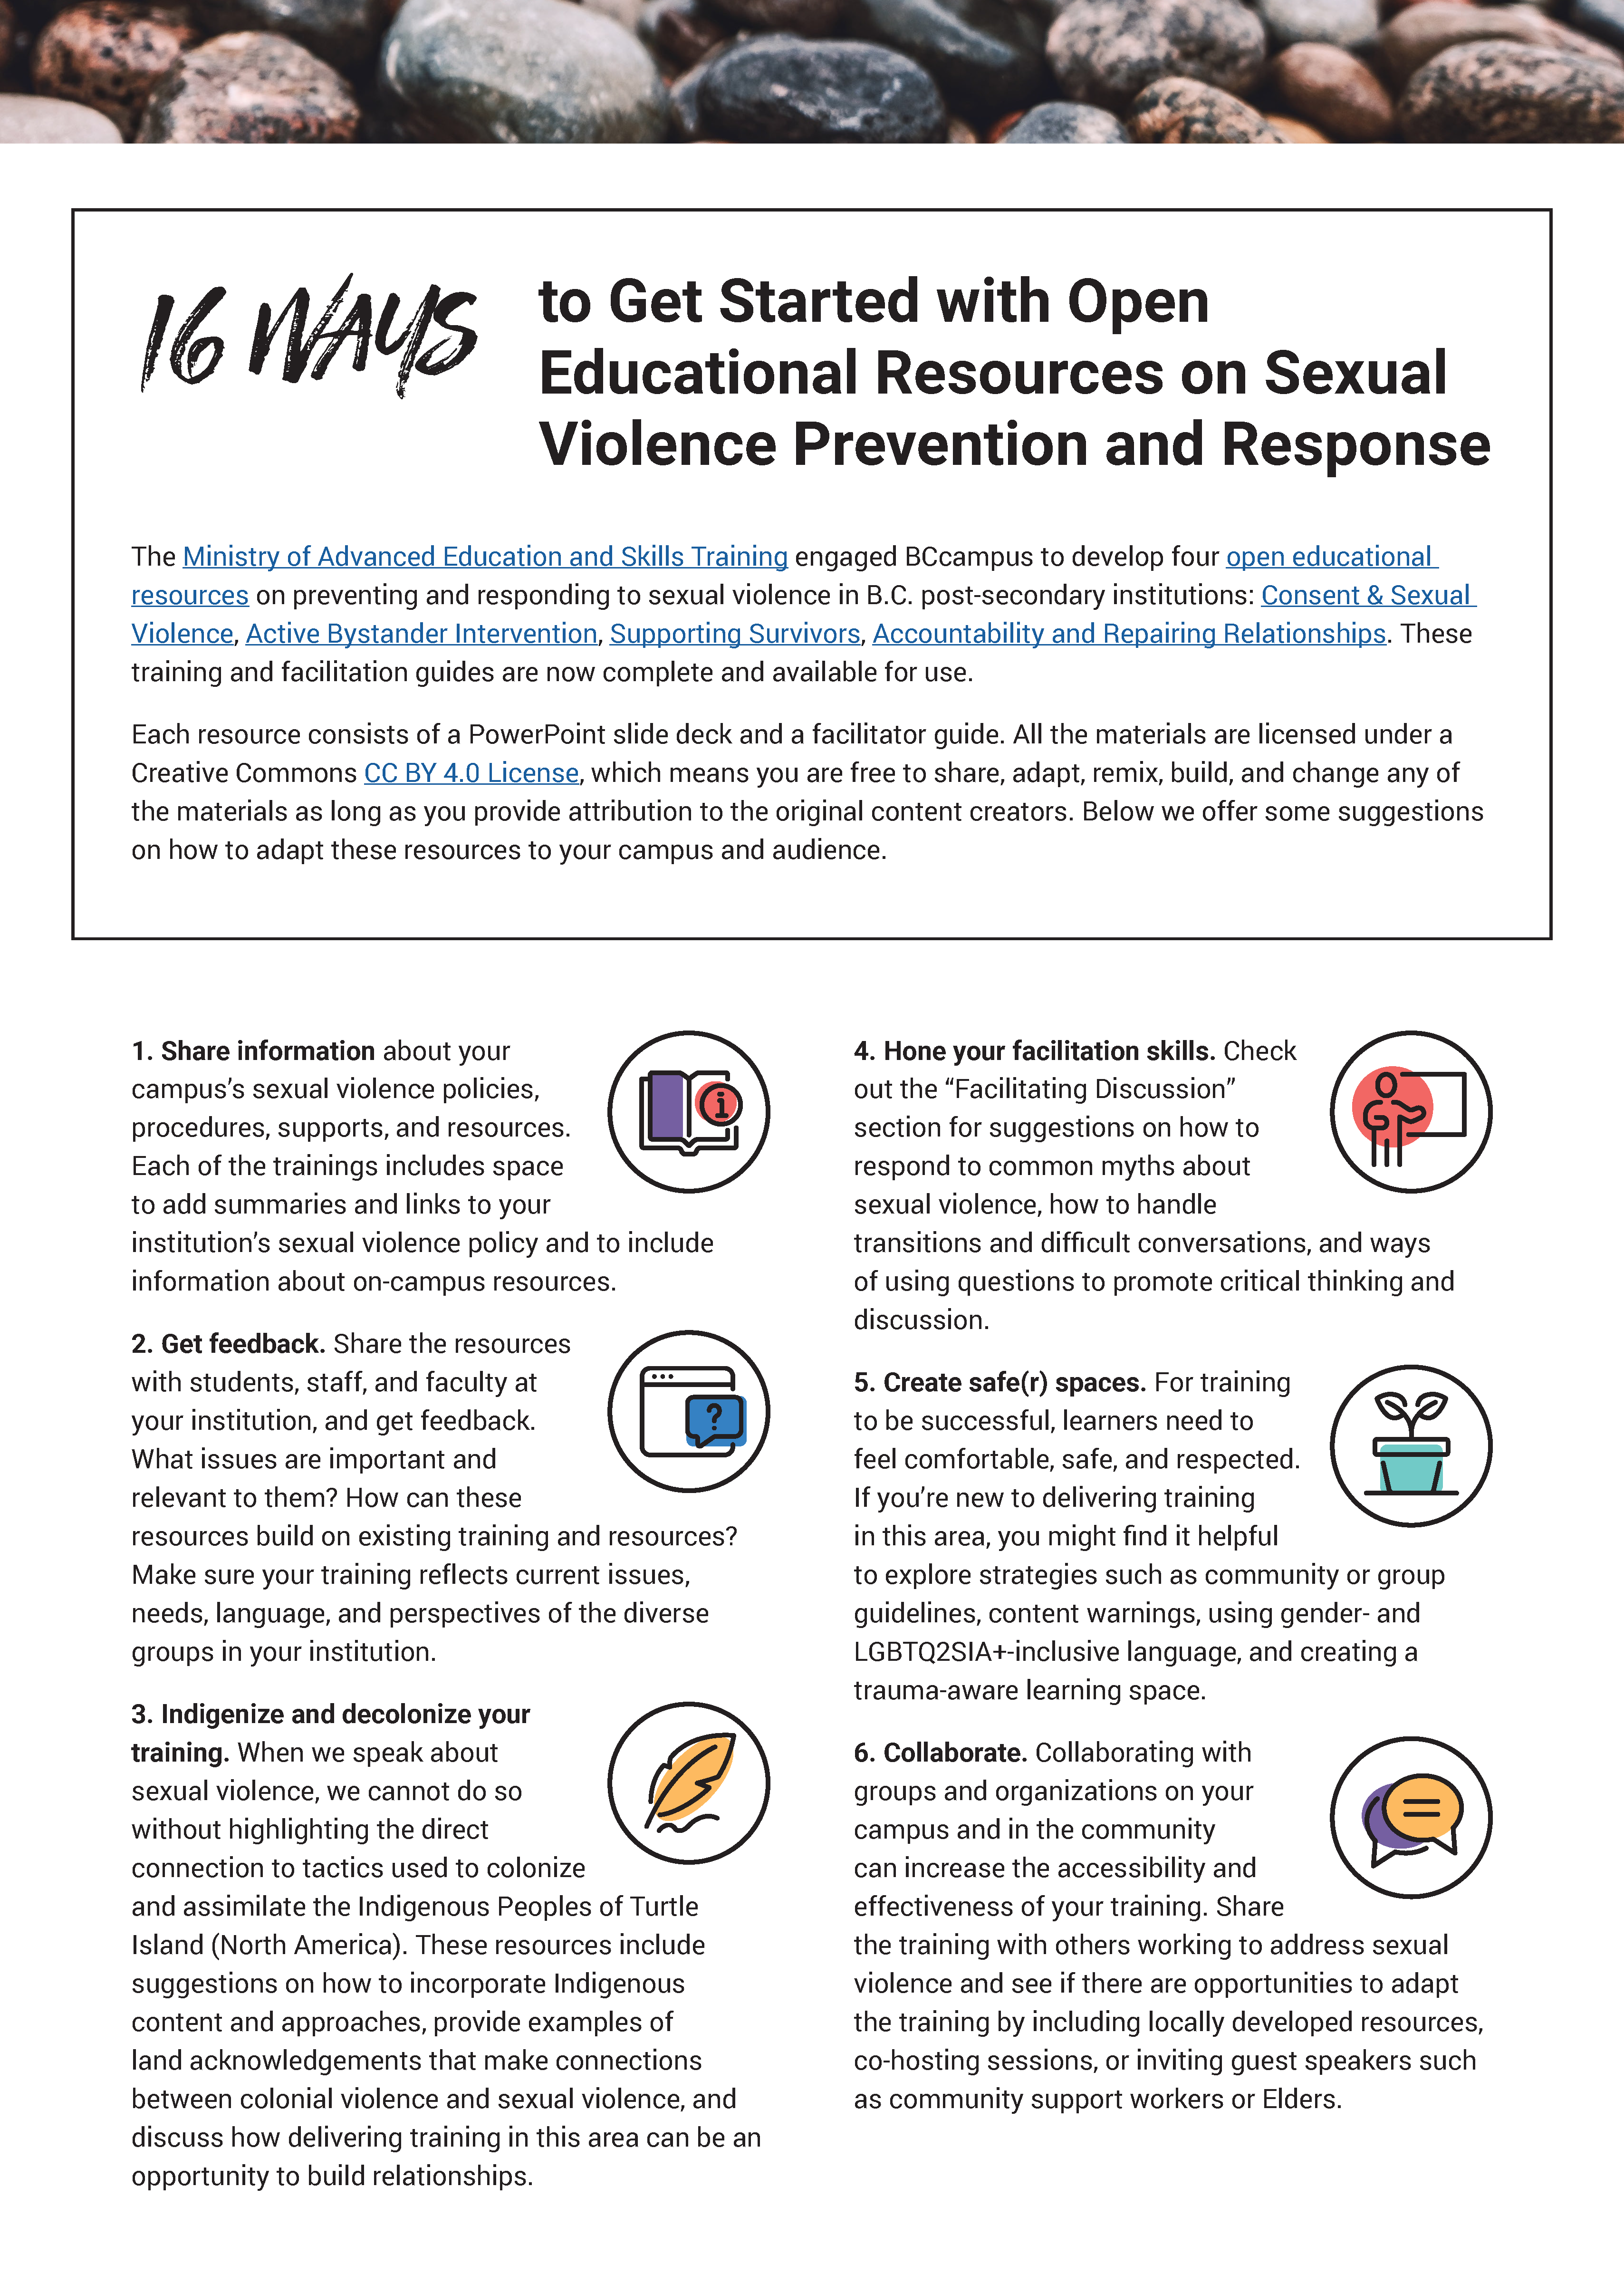 screenshot of the pdf: 16 ways to get started with Open Educational Resources on Sexual Violence Prevention and Response. PDF available for download in this chapter.